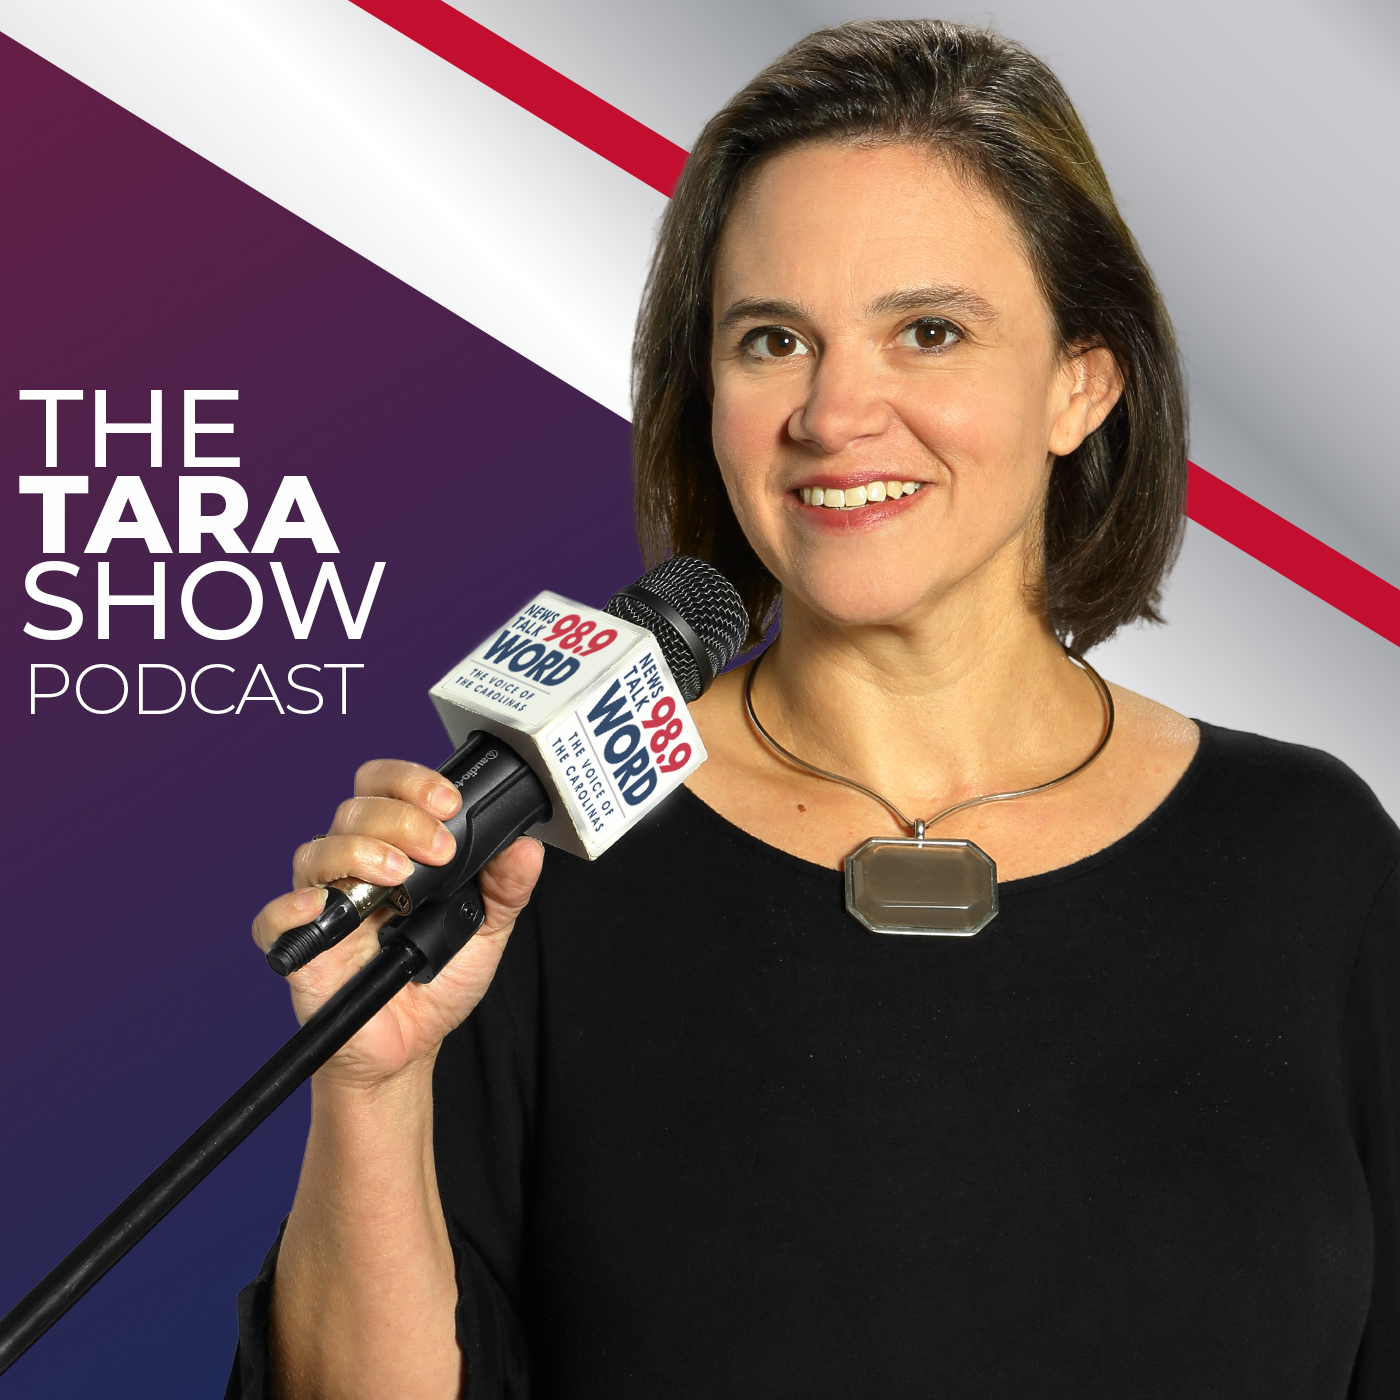 Hour 1: The Tara Show - “The Biden vs Trump Debate” “Diesel the Long Lost Donkey” “The End of Sheri Biggs” “The Countdown to Thursday” 